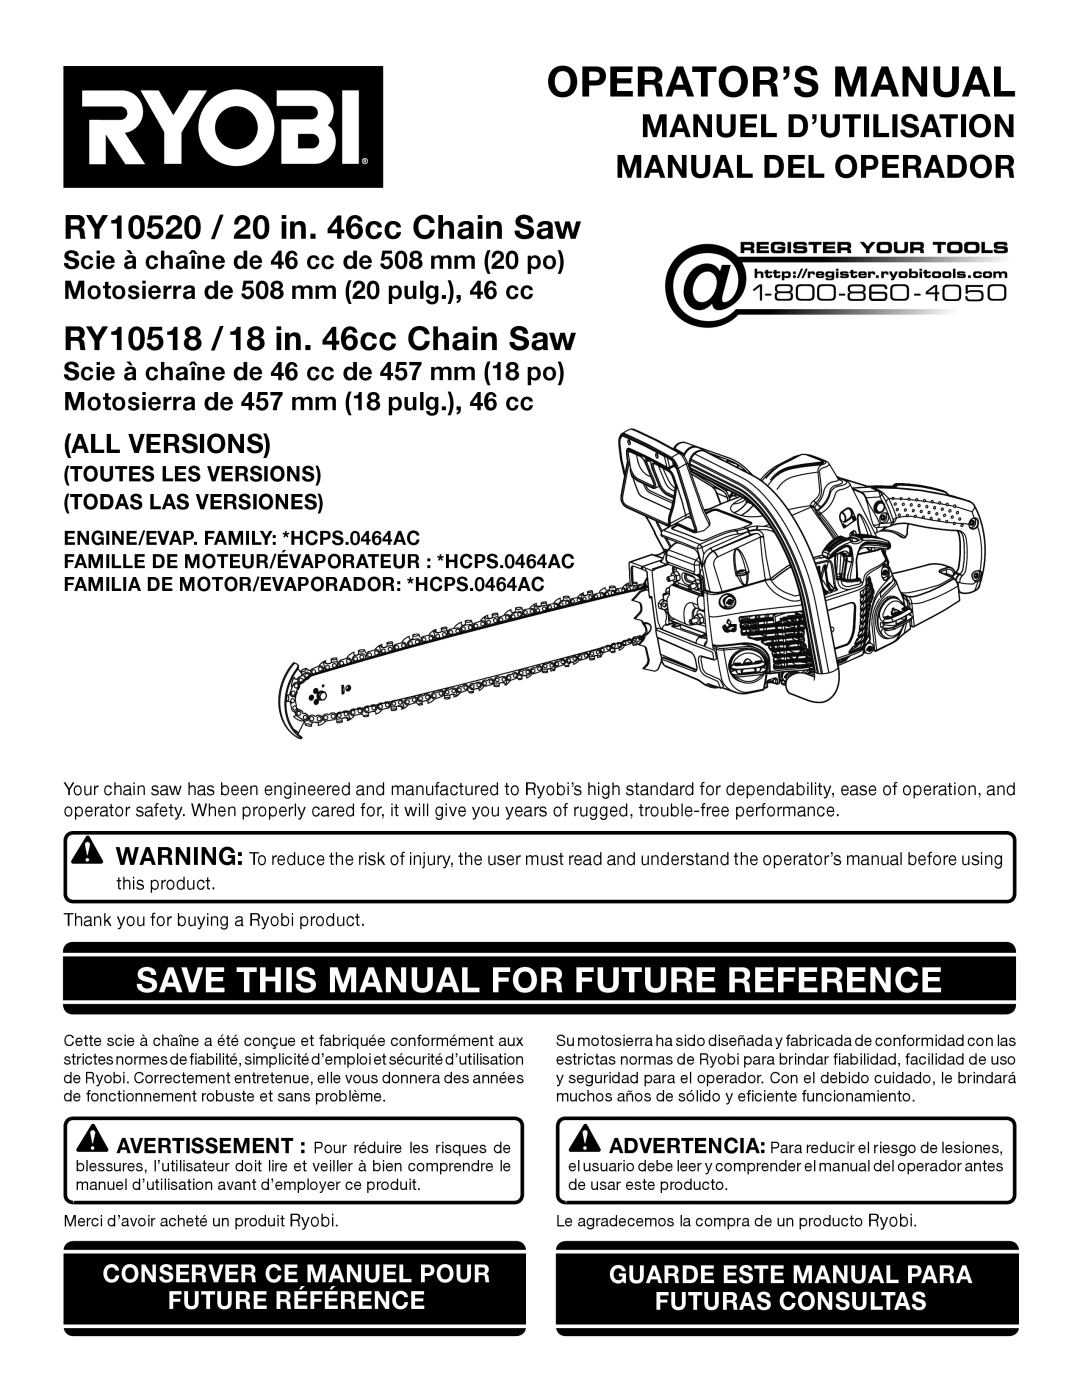 Ryobi RY10518 manuel dutilisation Save This Manual For Future Reference, RY10520 / 20 in. 46cc Chain Saw, All Versions 